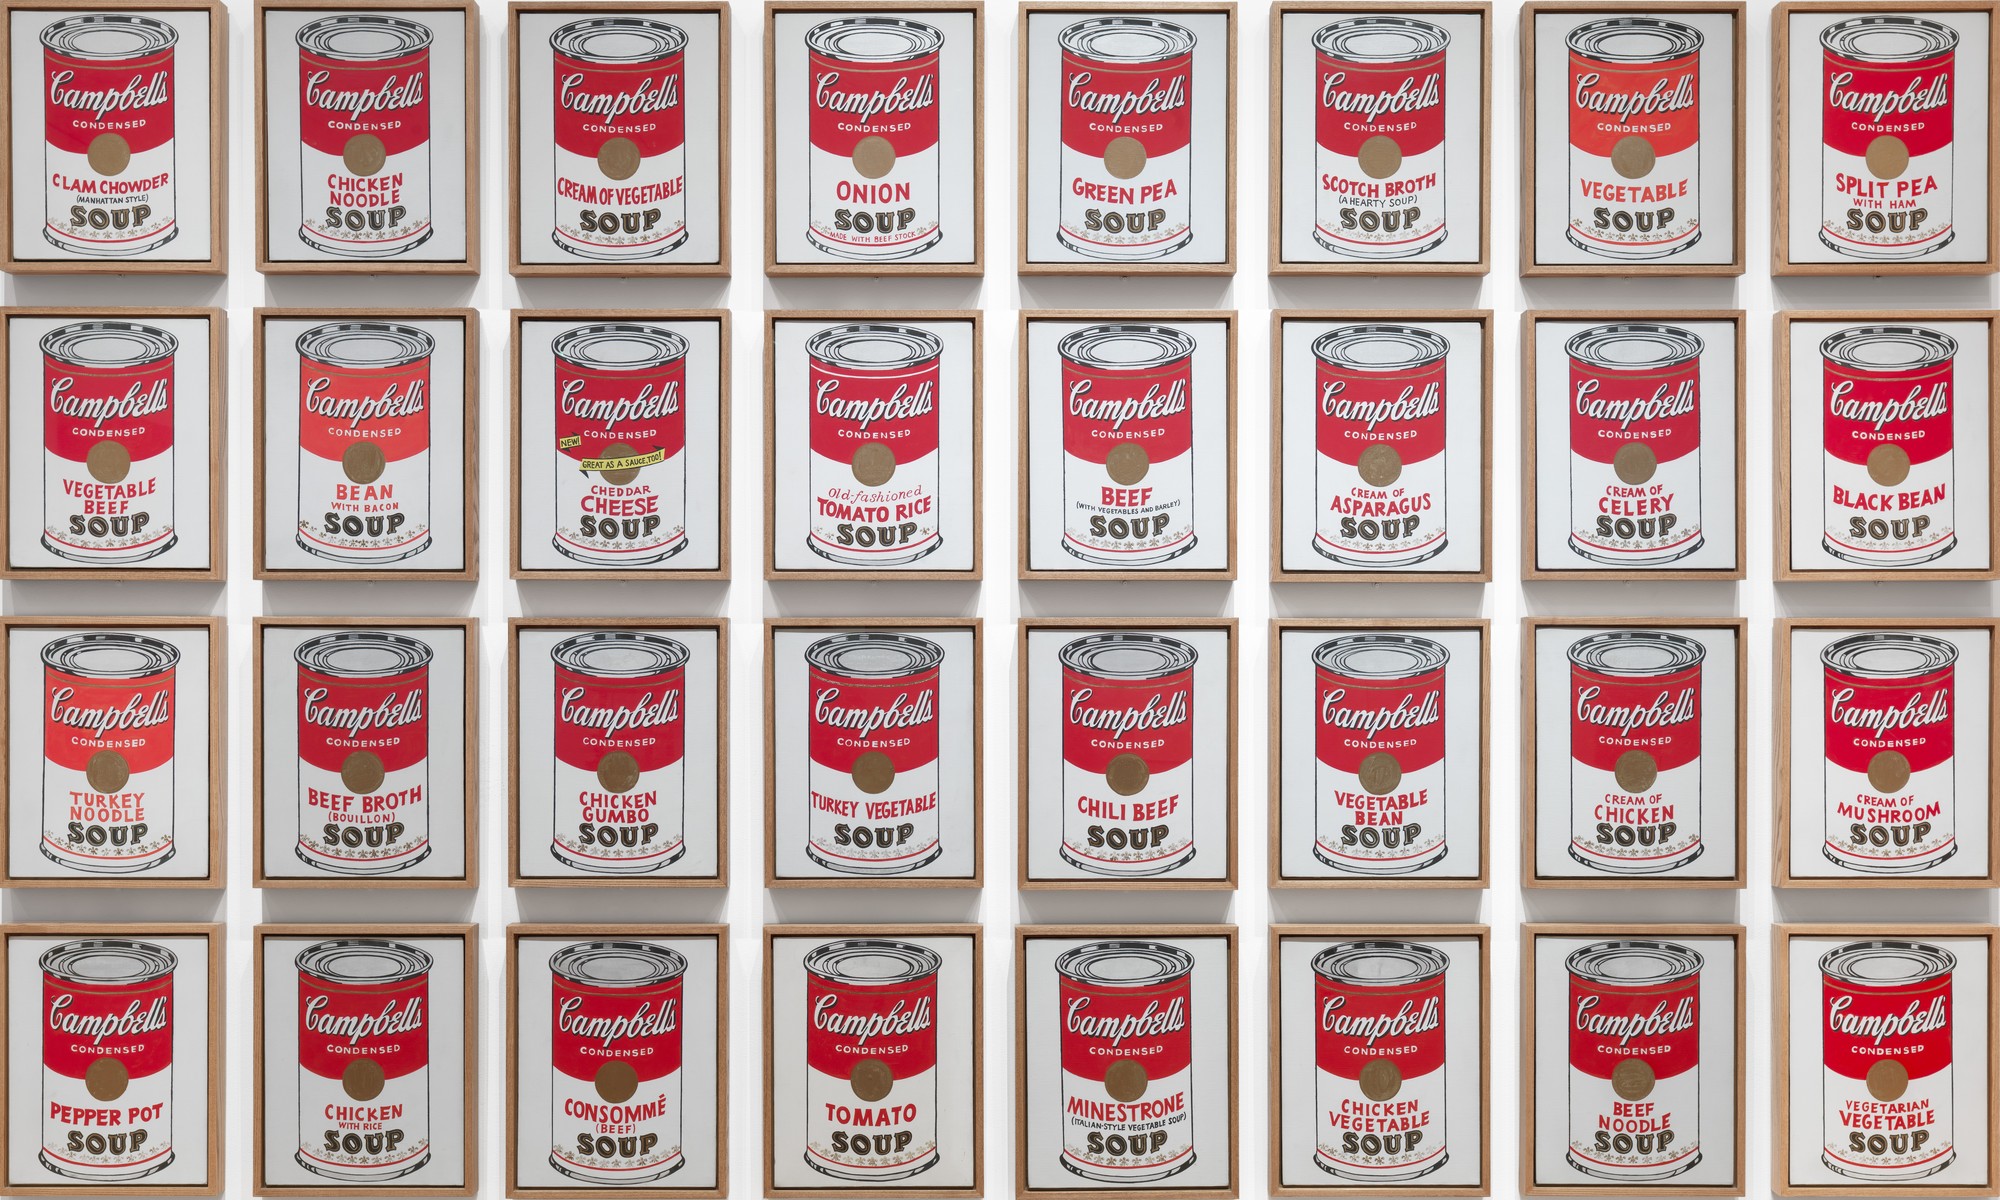 Andy Warhol: life and major works of the father of Pop Art